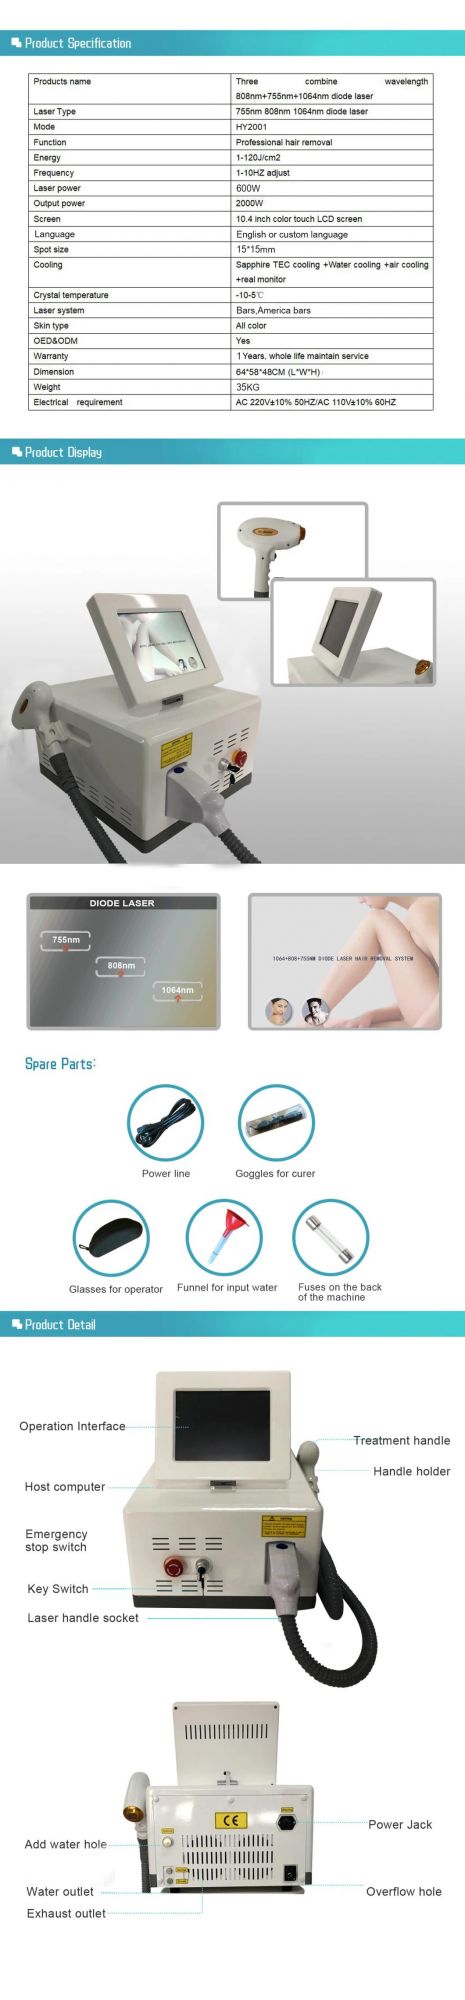 Best Cooling System 808nm Diode Laser for Hair Removal Device